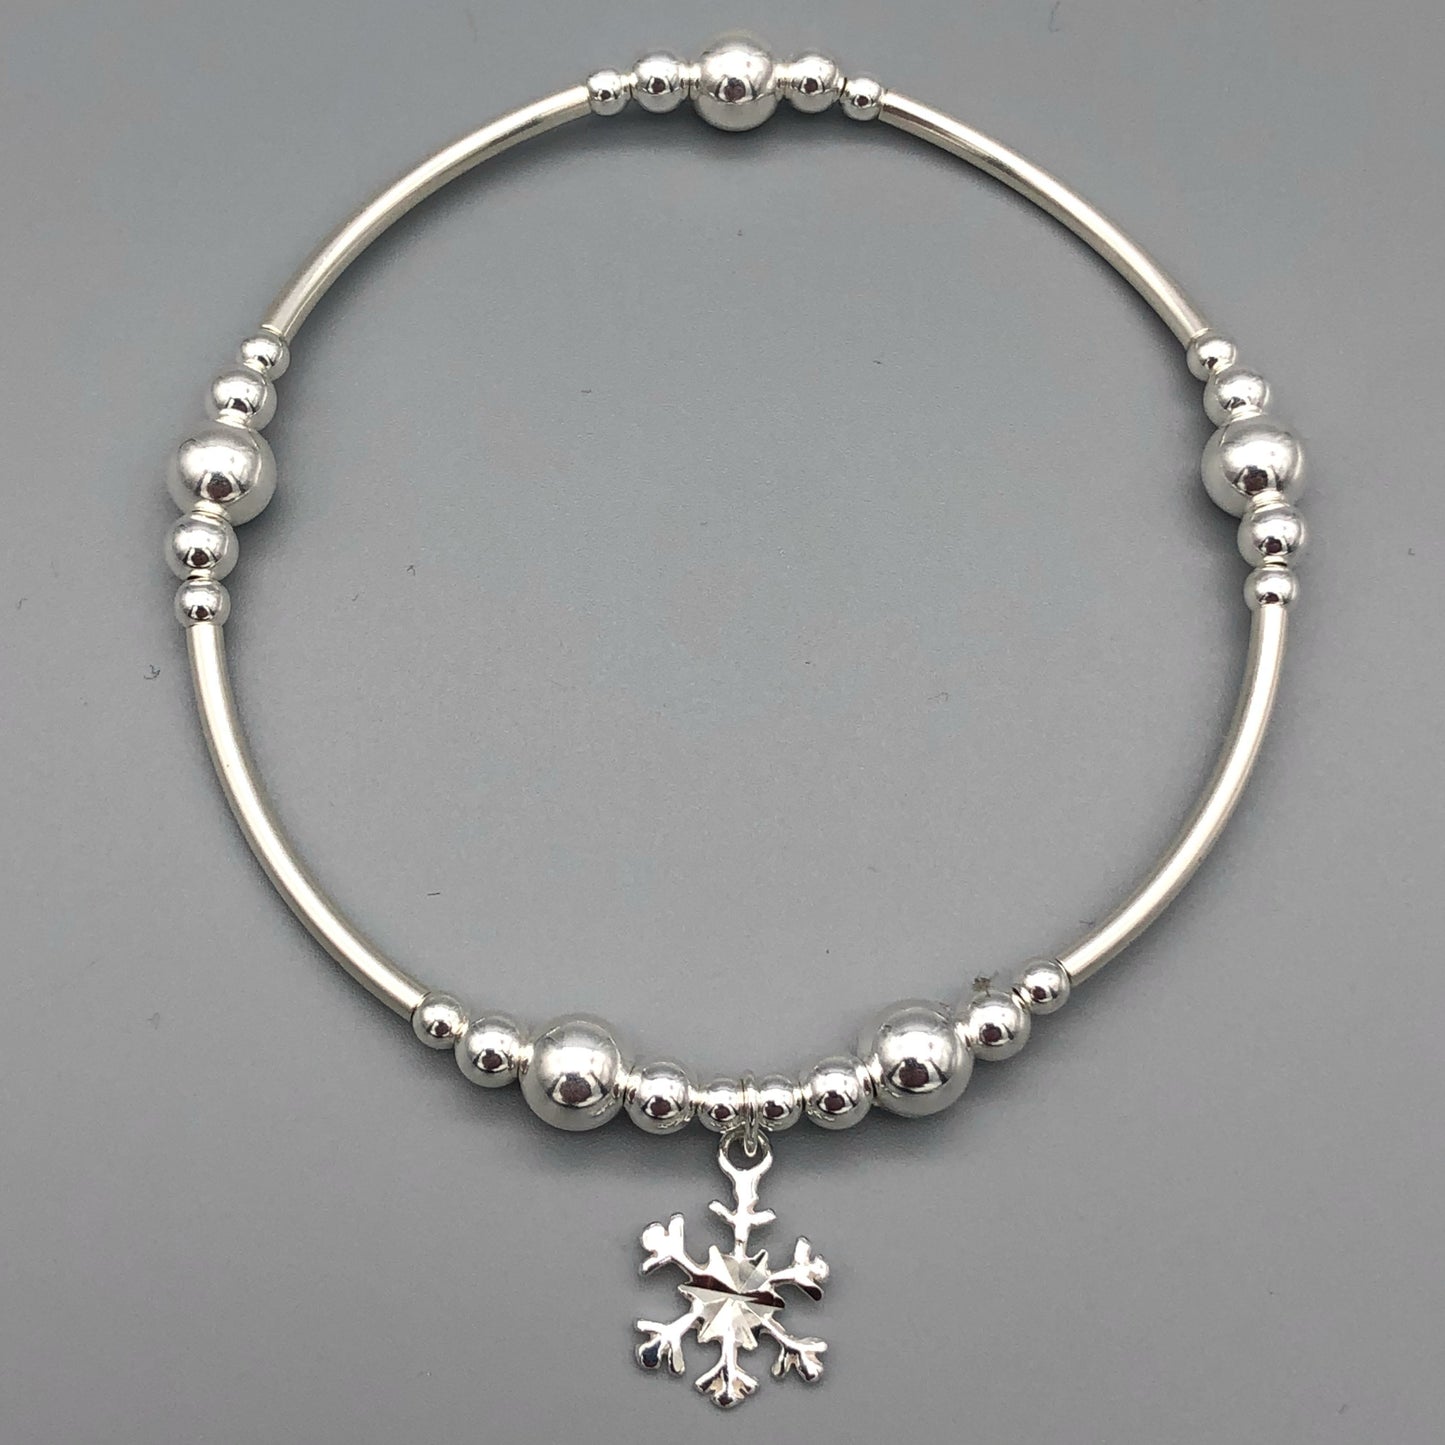 Snowflake charm sterling silver stacking bracelet for her by My Silver Wish